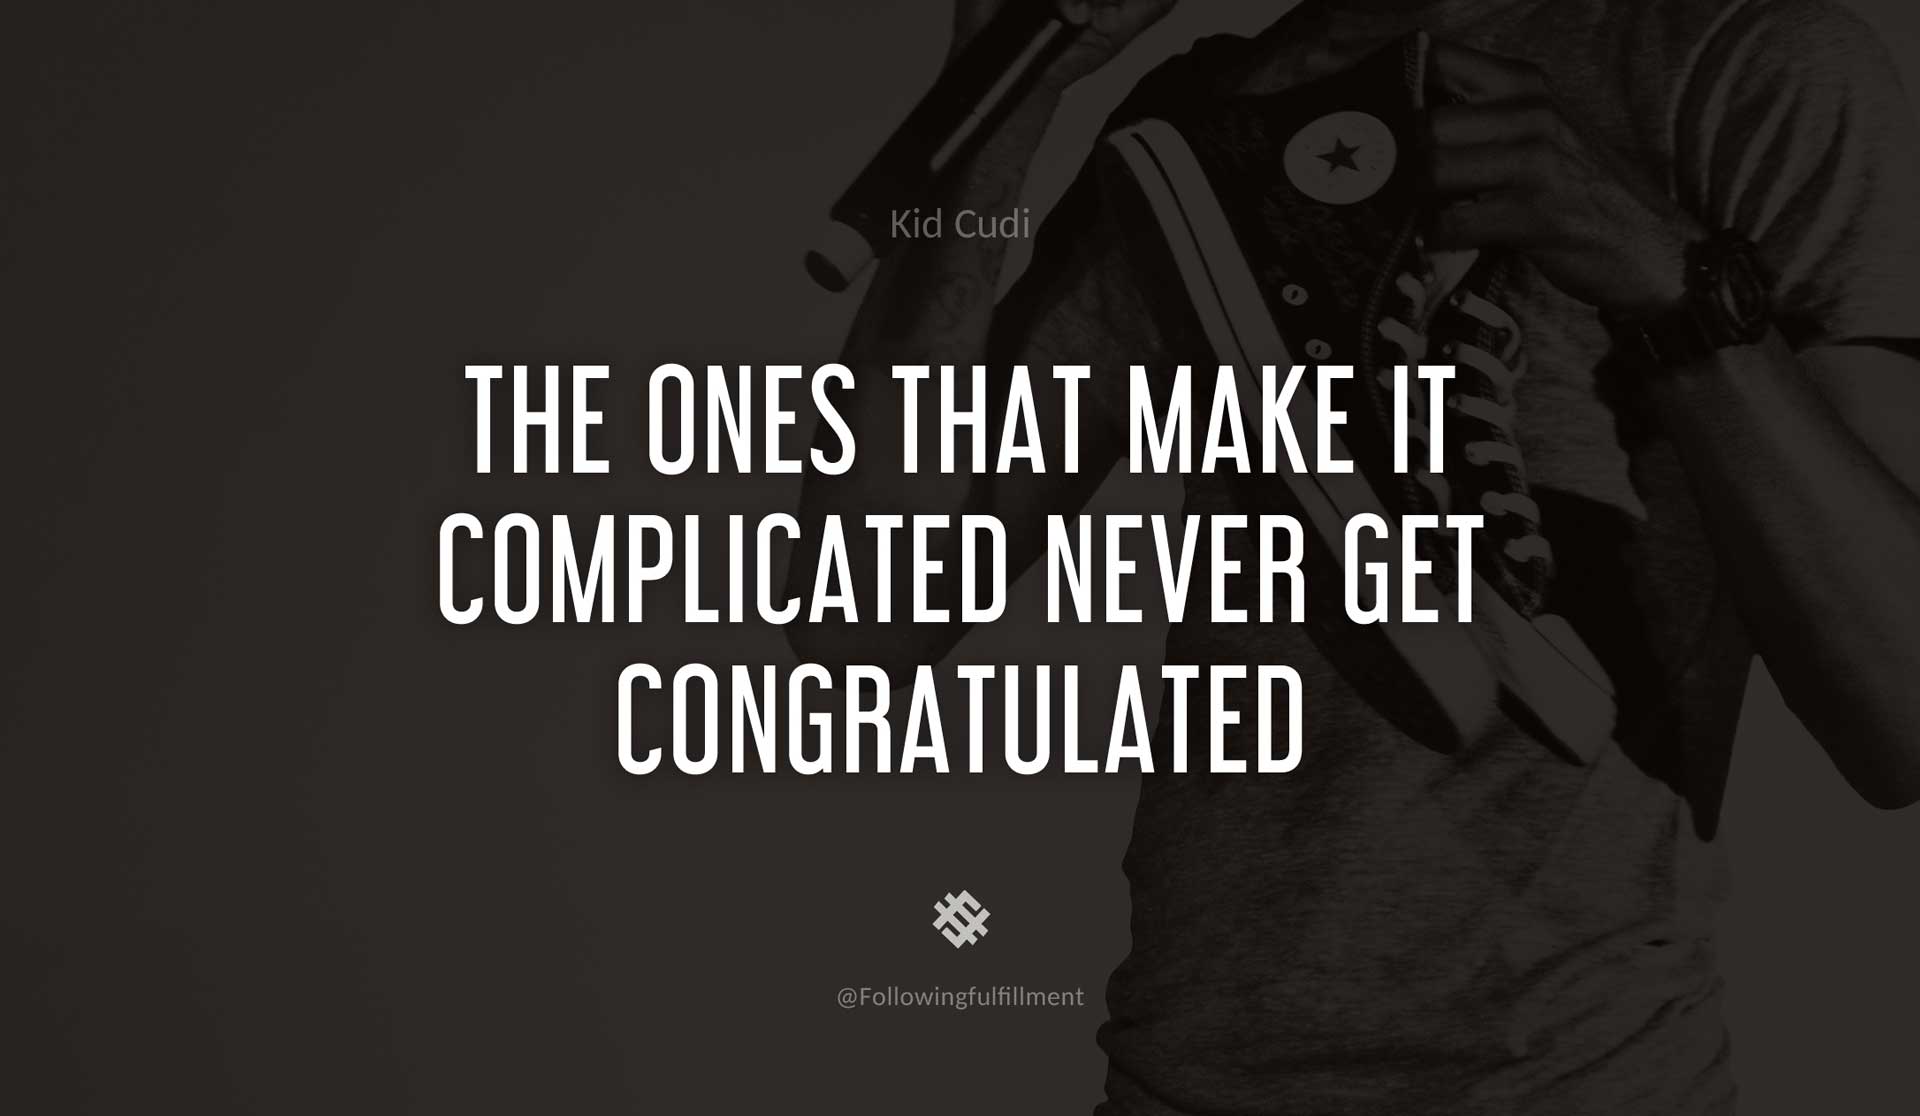 The-ones-that-make-it-complicated-never-get-congratulated-KID-CUDI-Quote.jpg